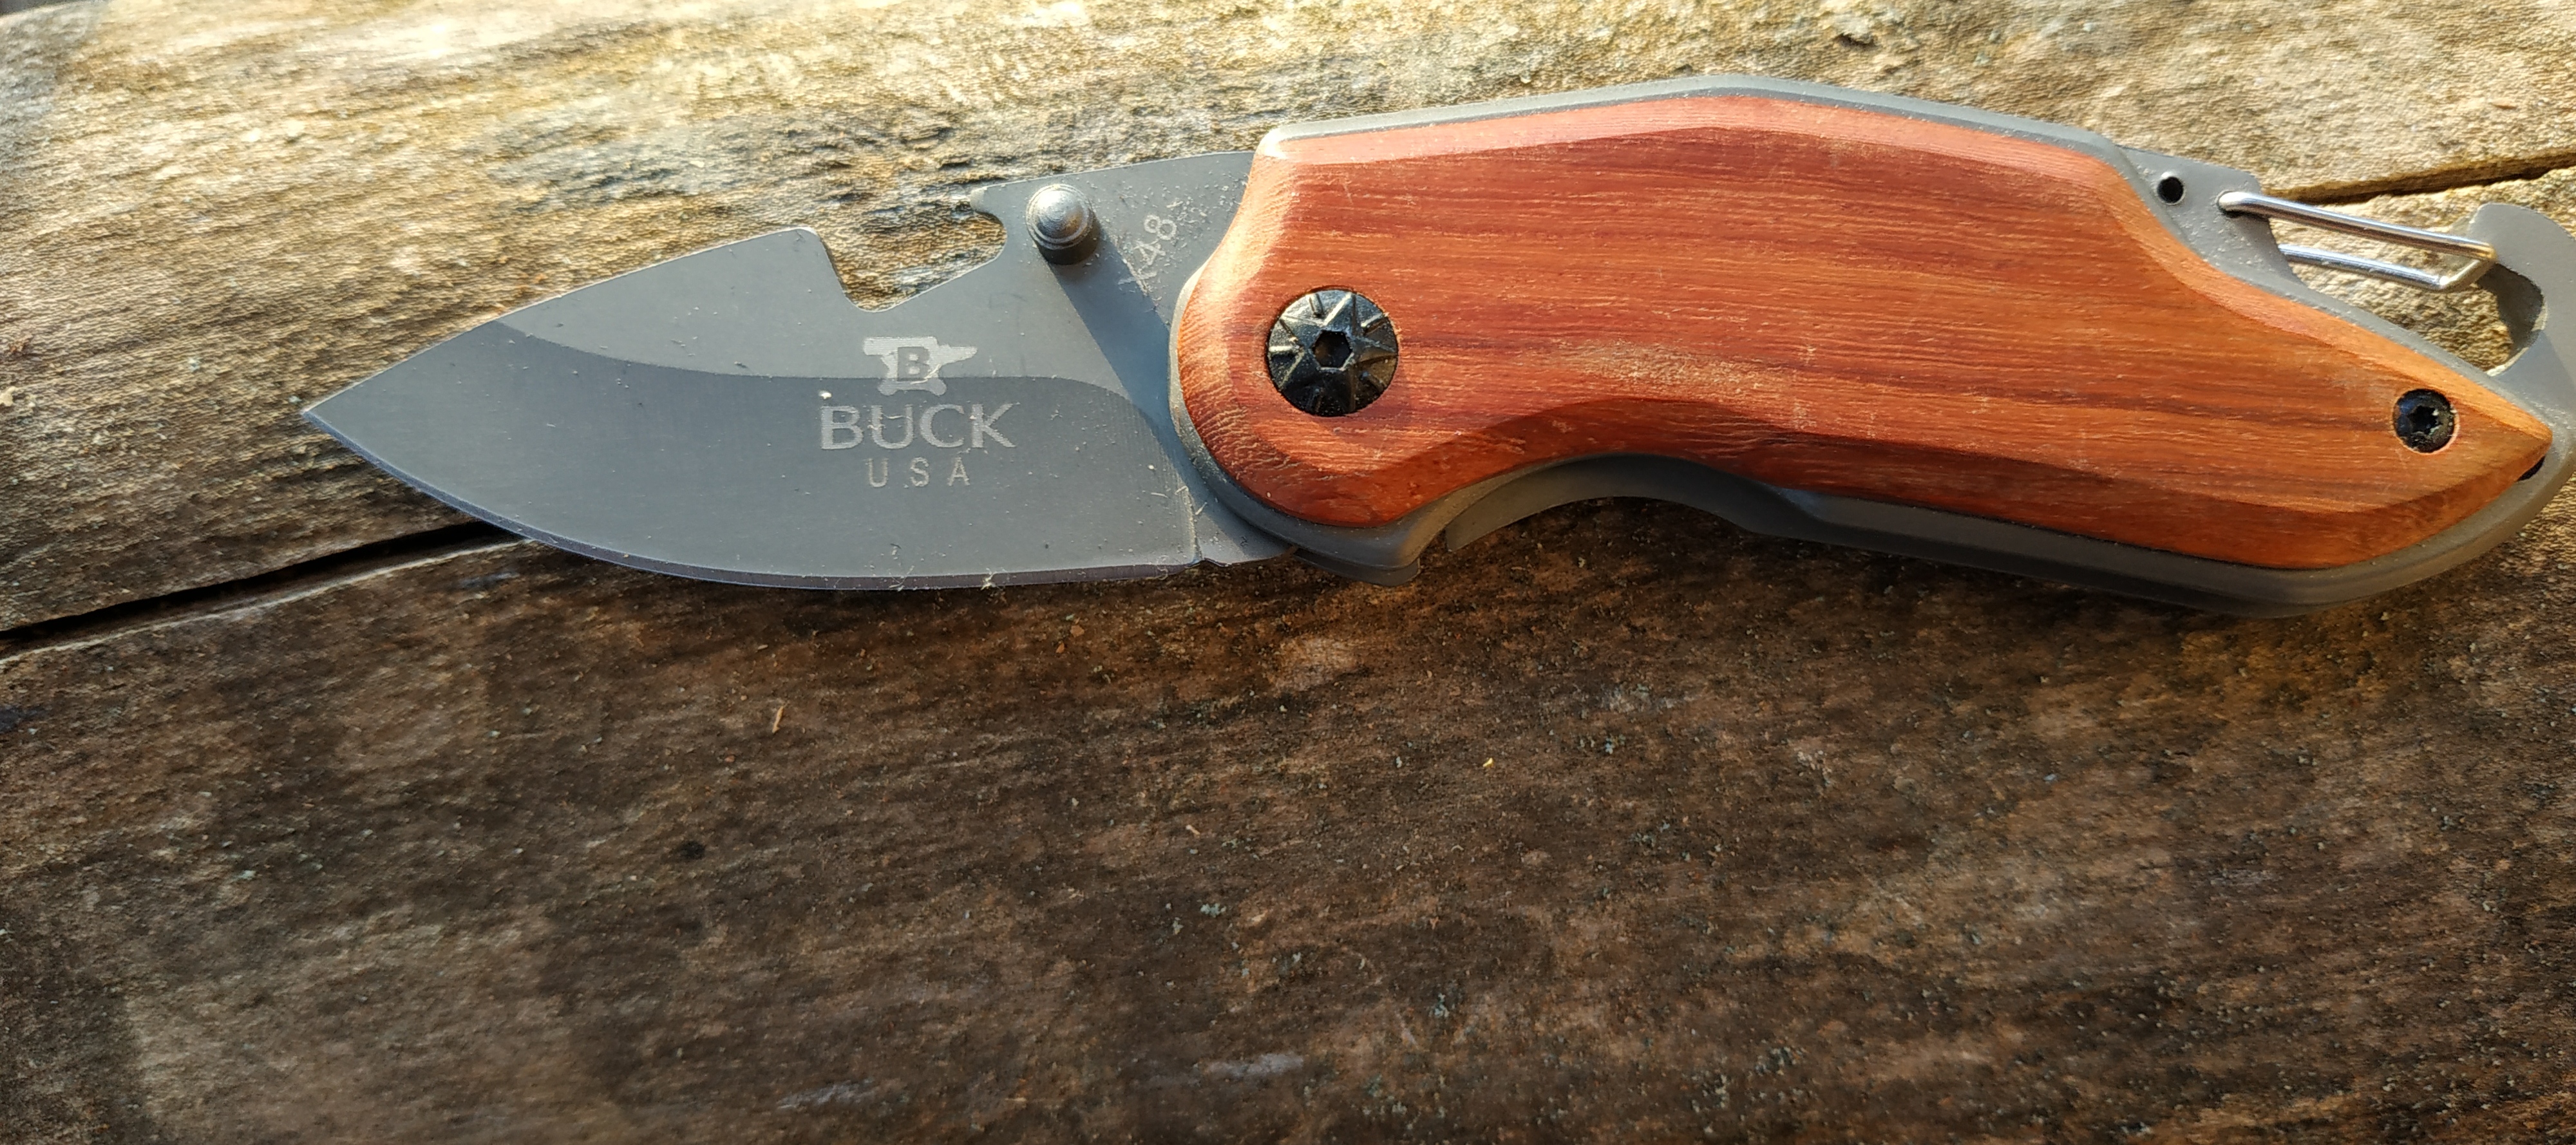 Folding pocket knife, wooden handle with engraving